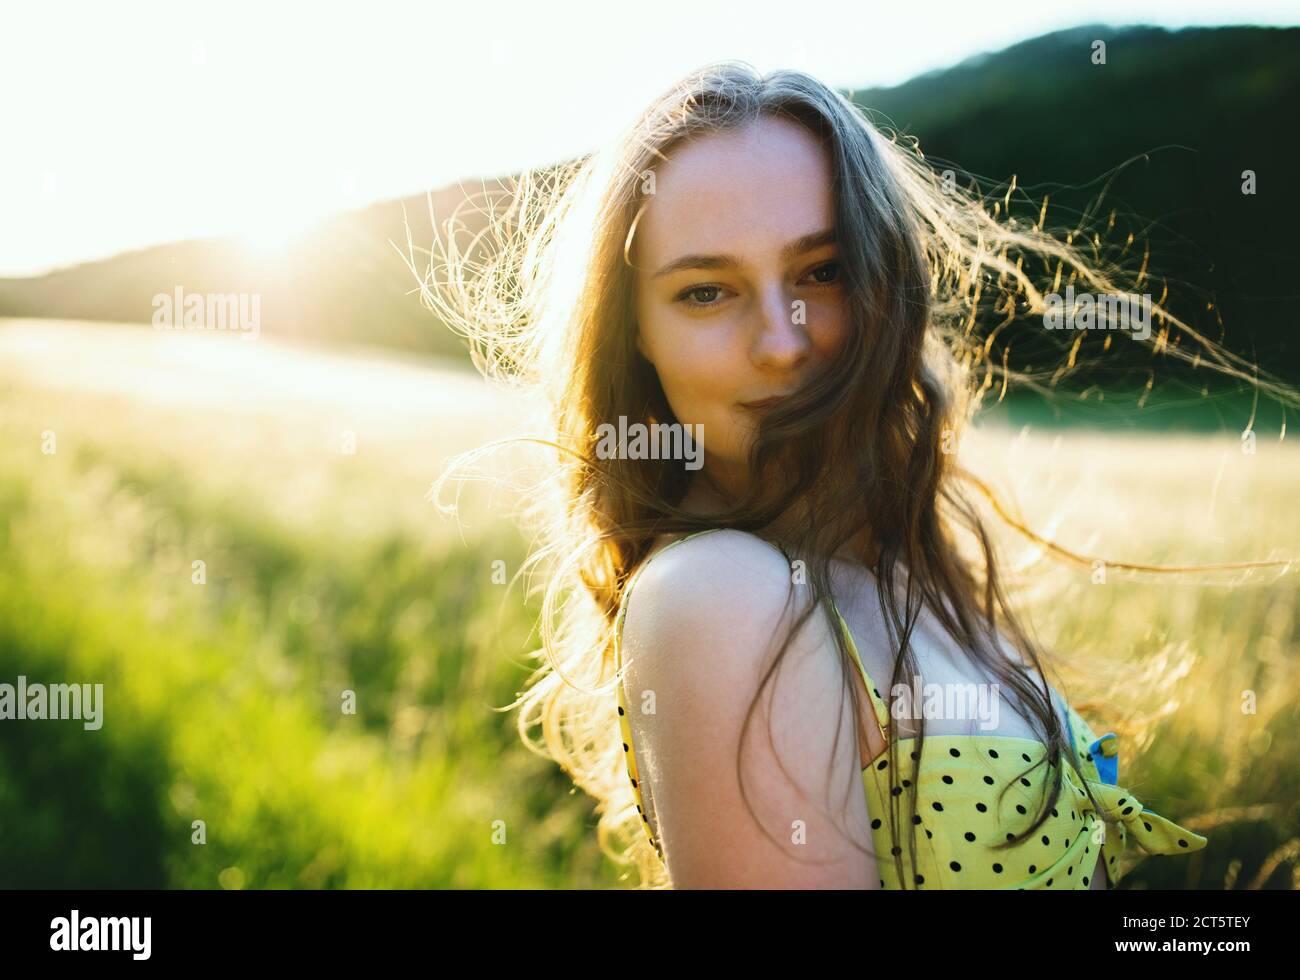 Portrait of young teenager girl outdoors in nature at sunset. Stock Photo